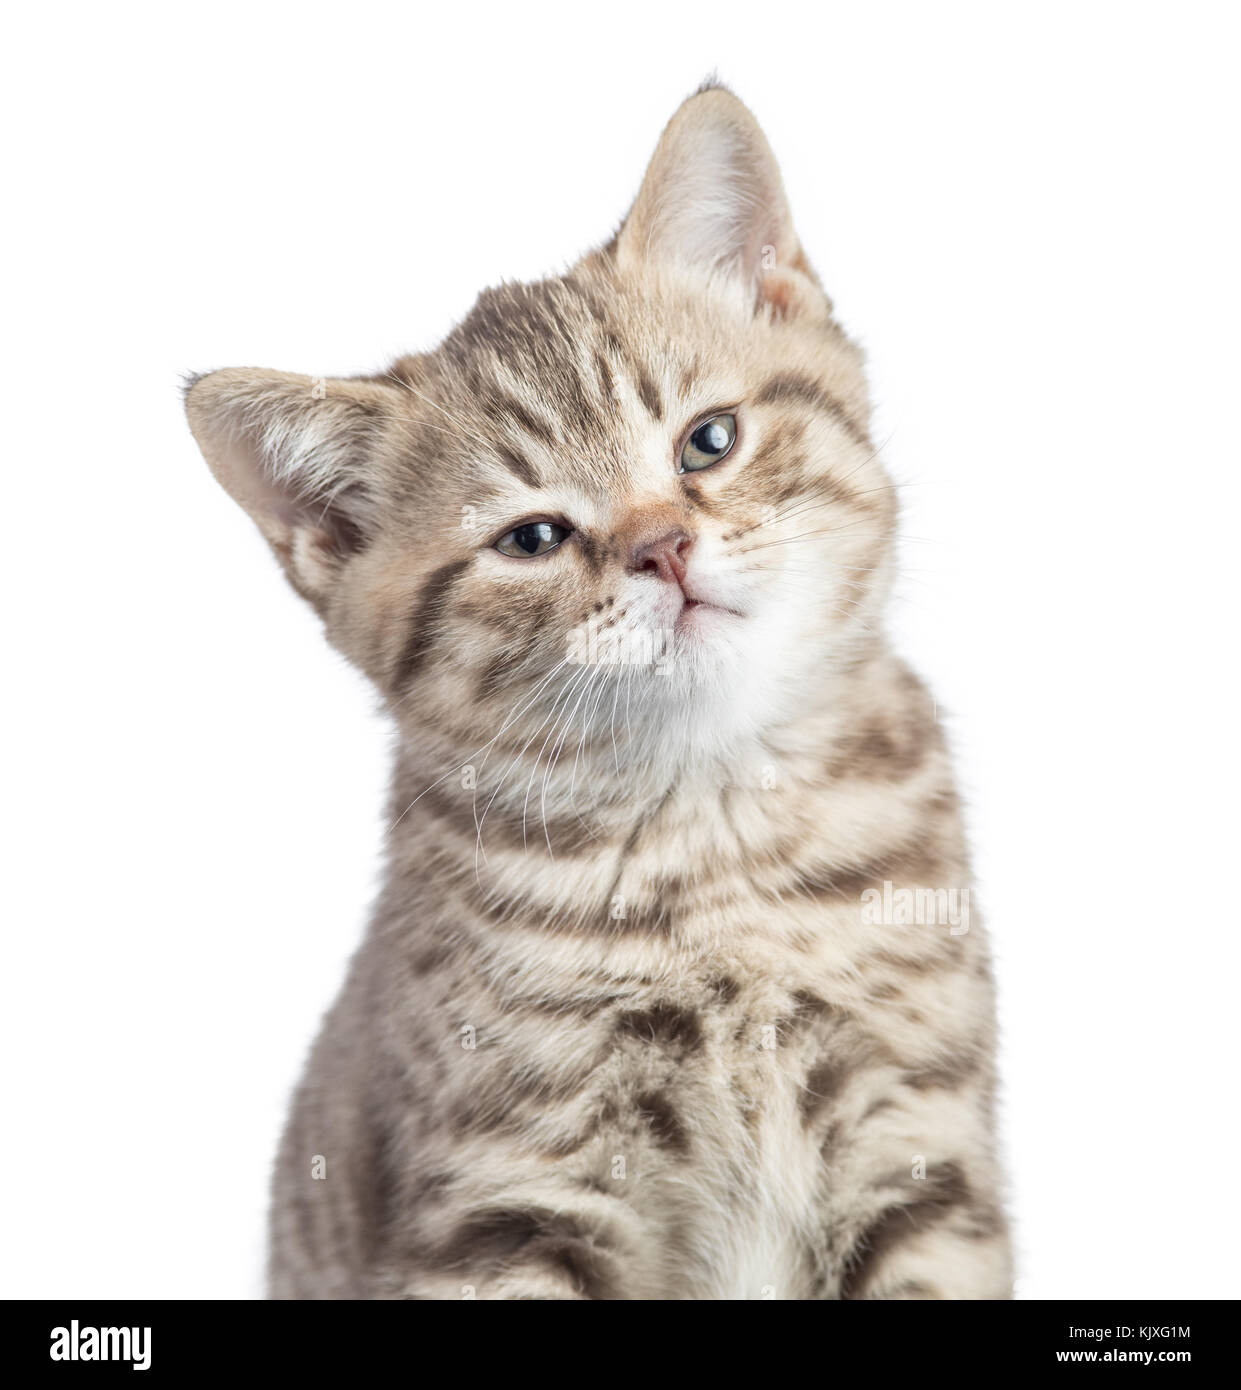 Satisfied cat portrait isolated Stock Photo